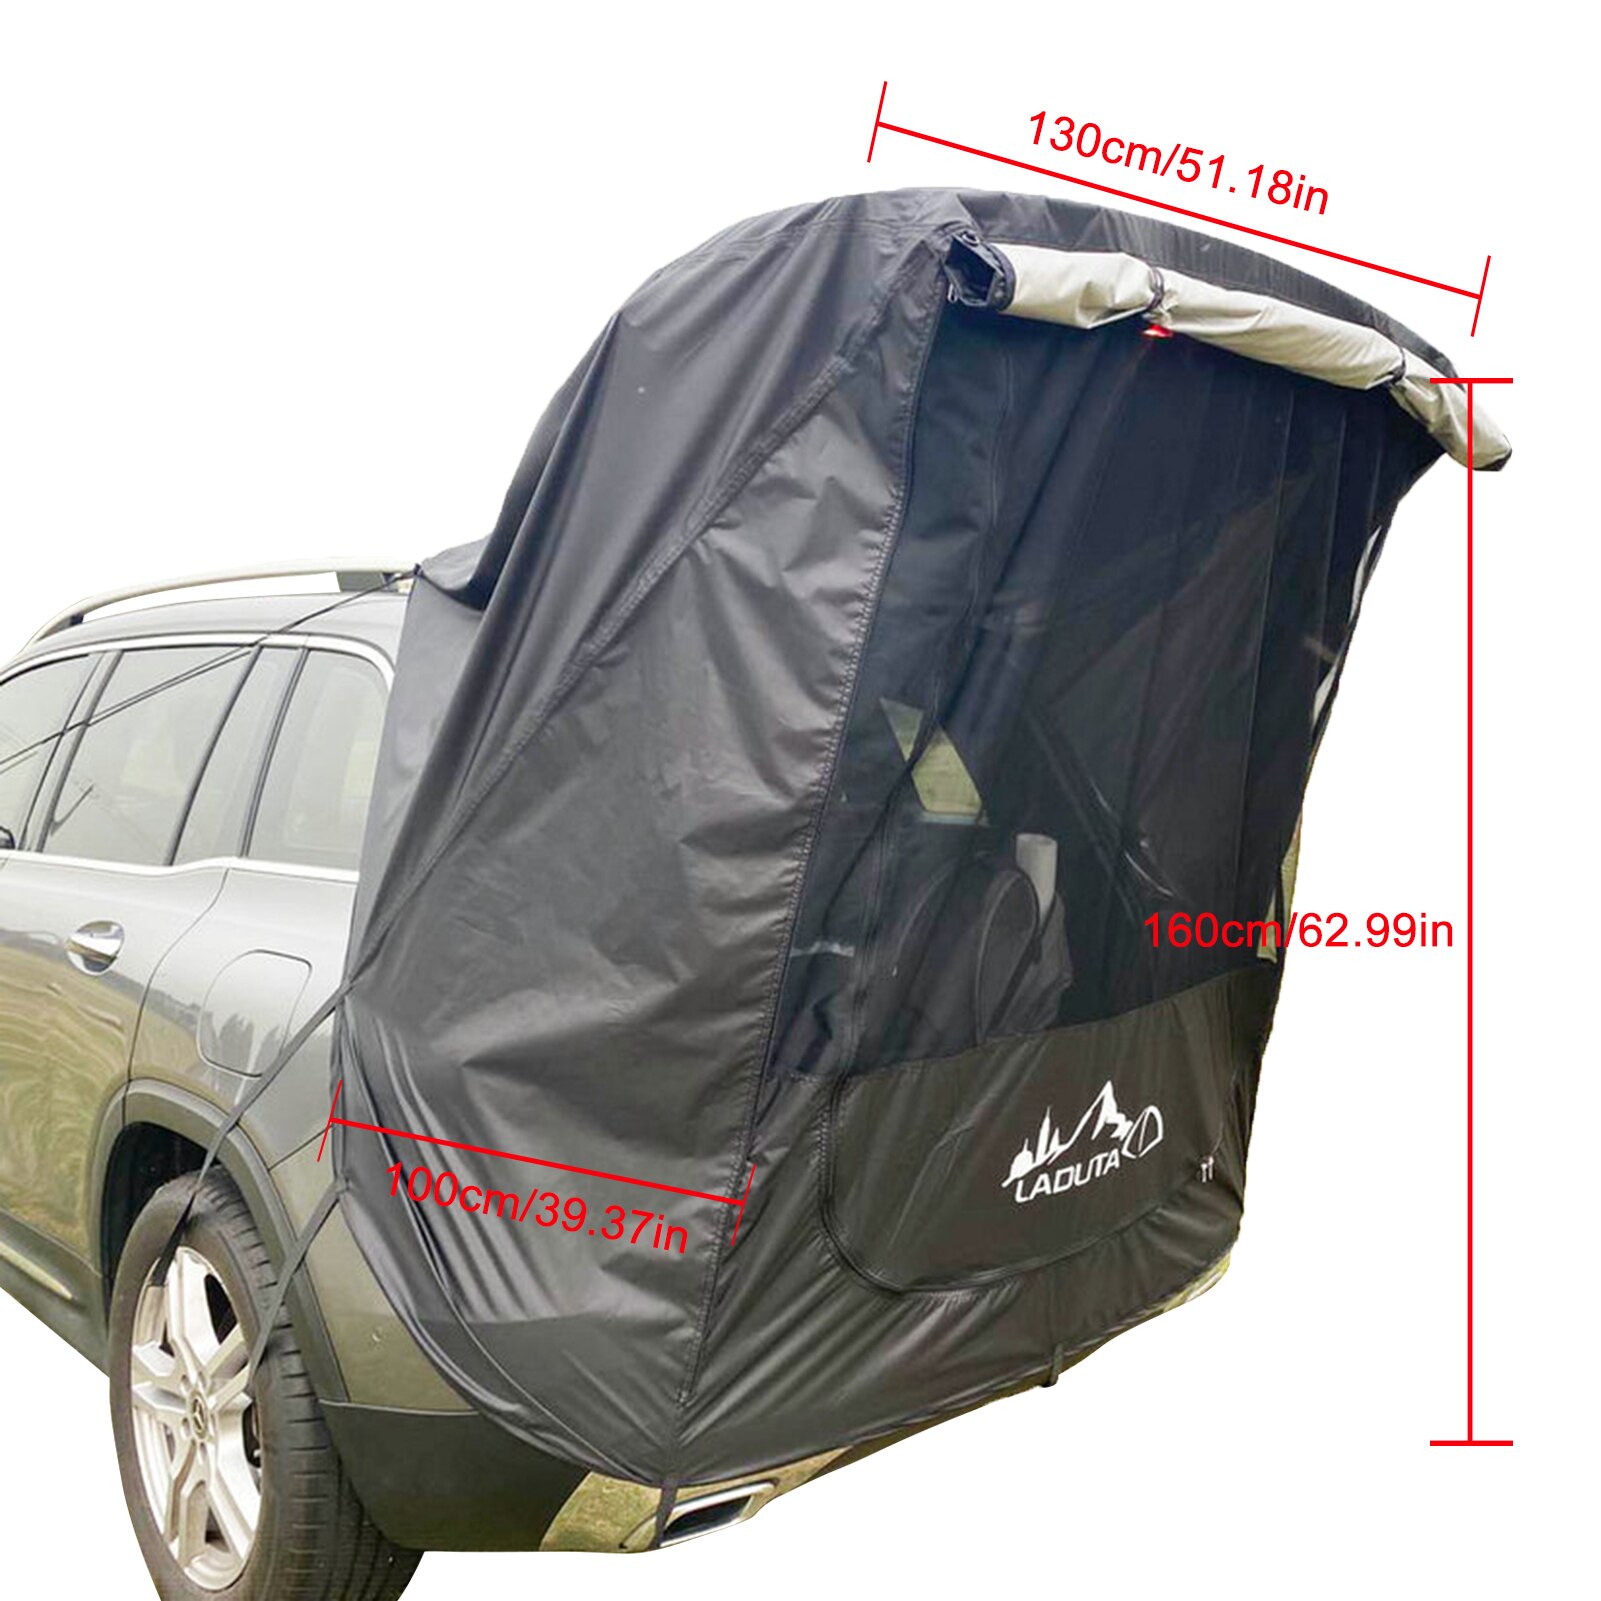 Car Tail Extension Bed Sunshade Rainproof Rear Tent Simple Motorhome For Self Driving Tour